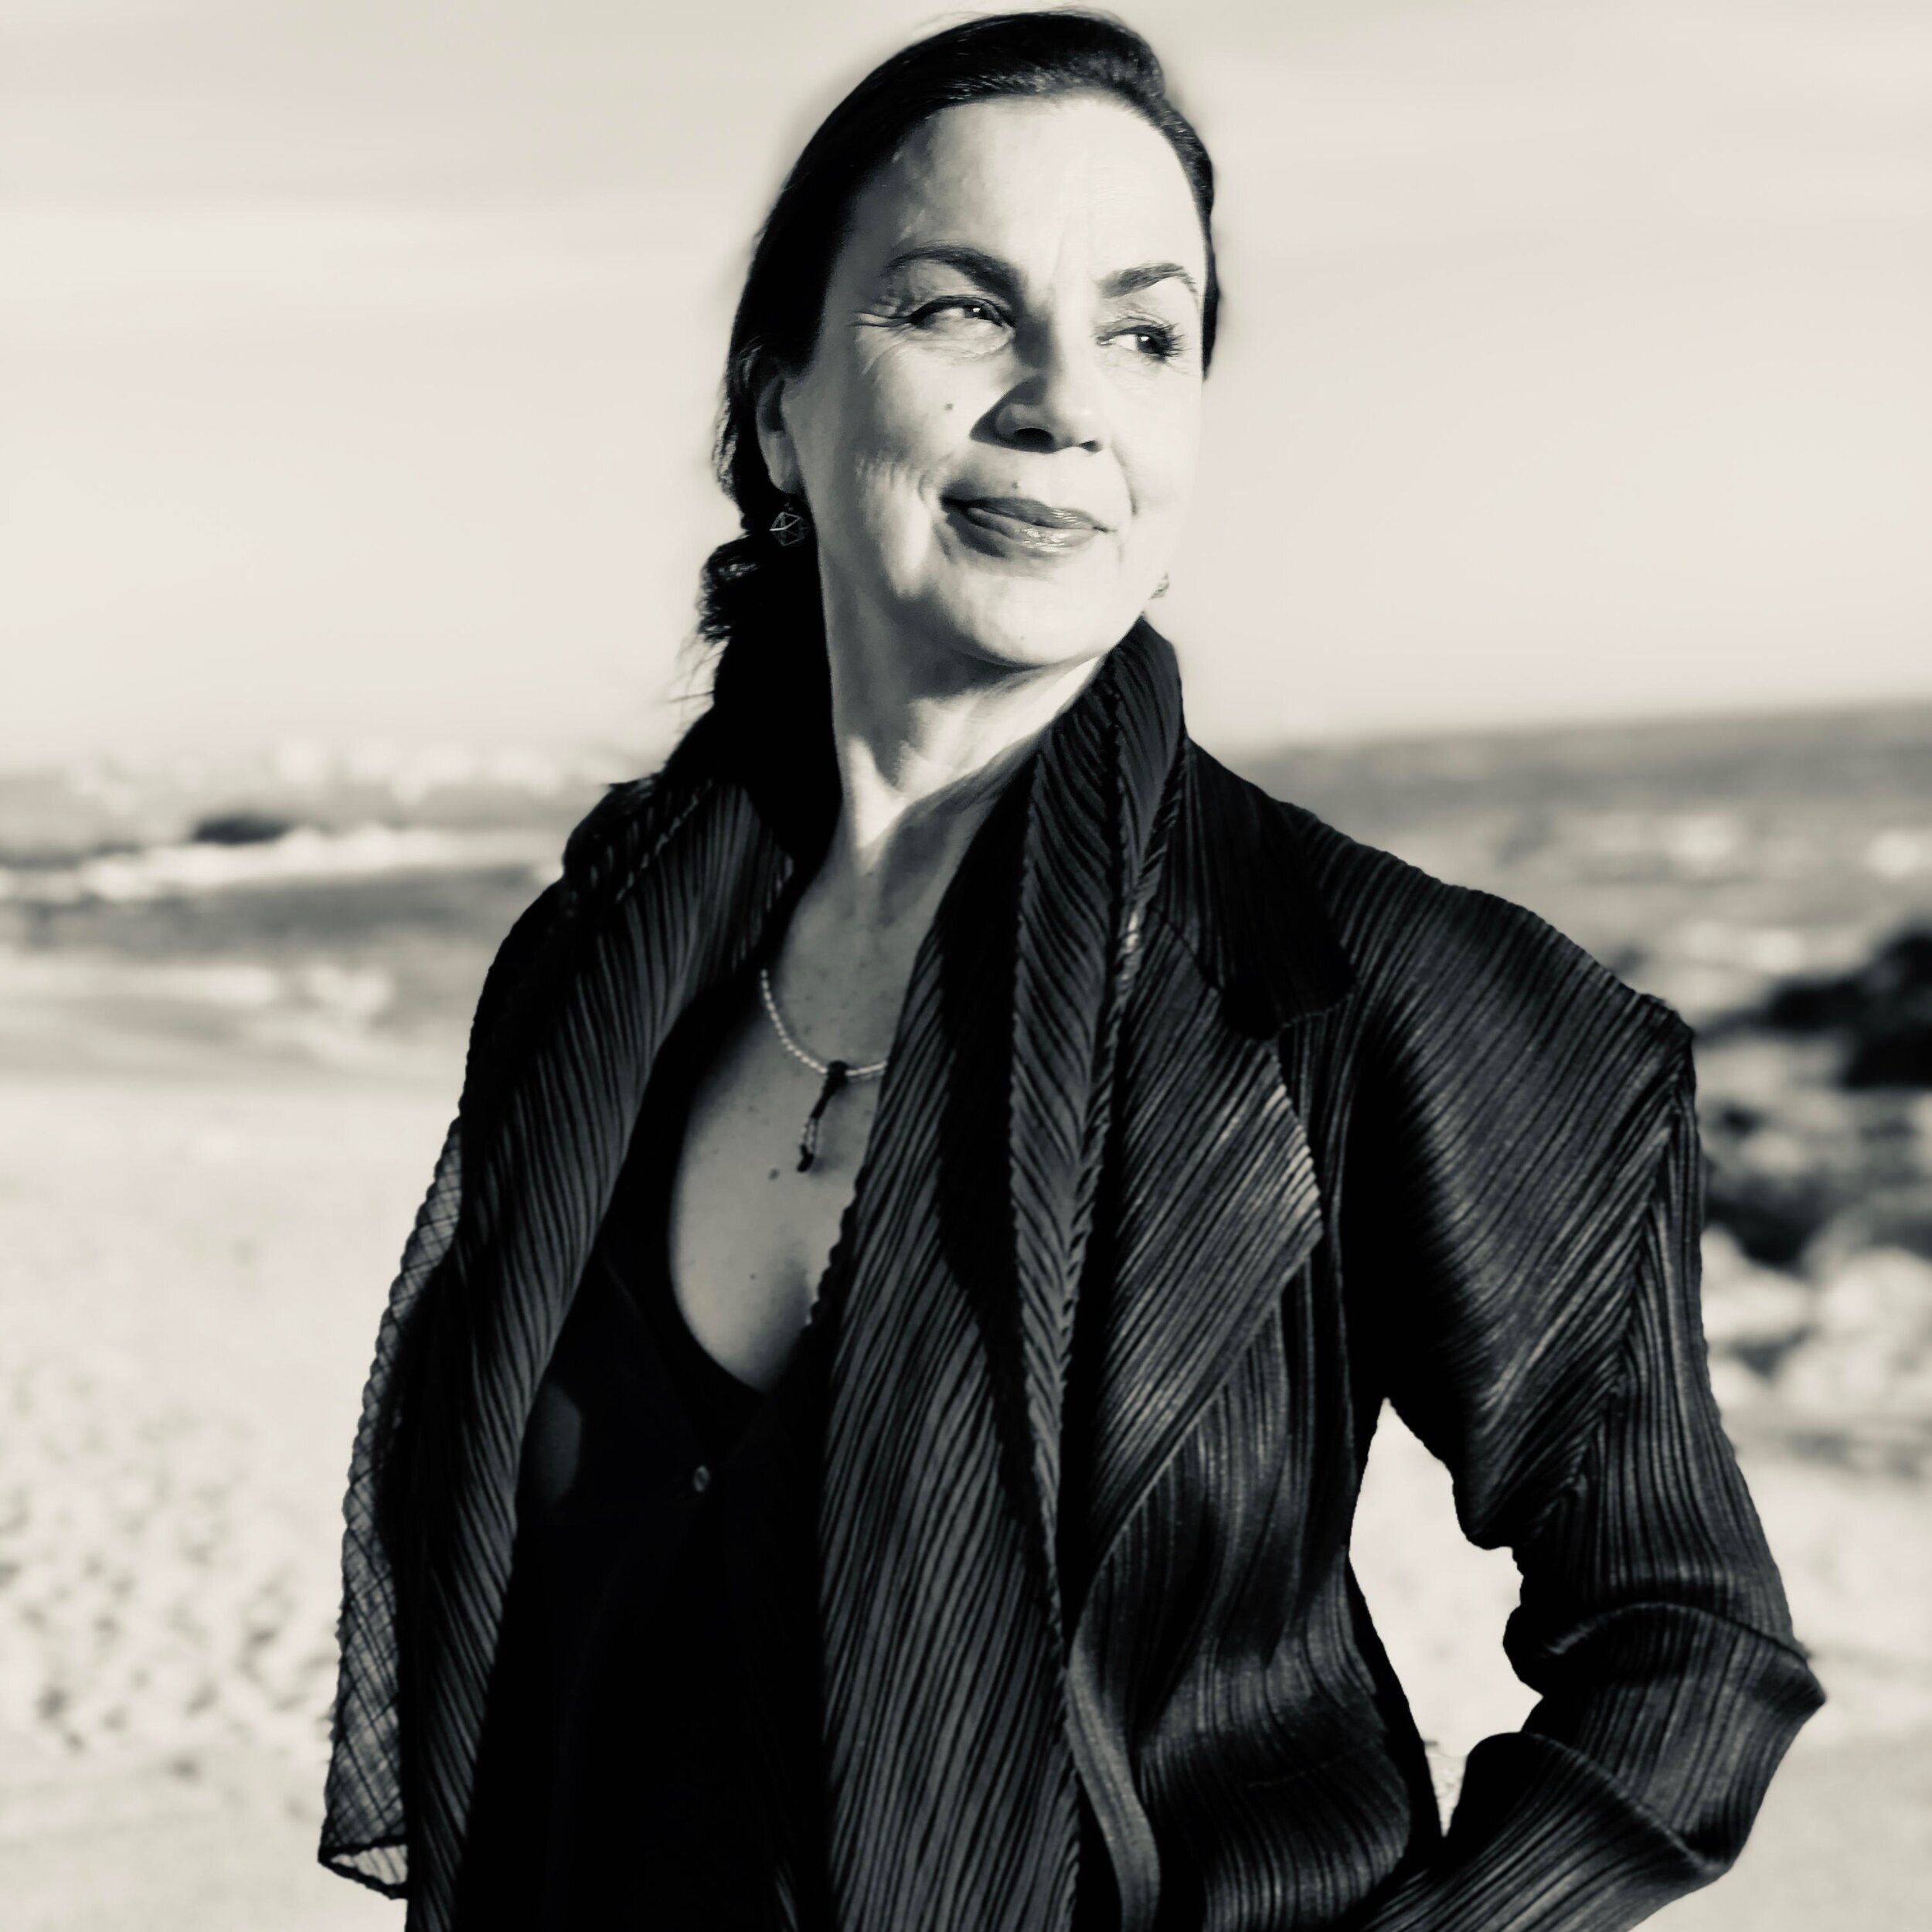 Victoria Vesna , Ph.D. - Artist and Professor at the UCLA Department of Design Media Arts and Director of the Art|Sci Center at the School of the Arts (North campus) and California NanoSystems Institute (CNSI) (South campus).